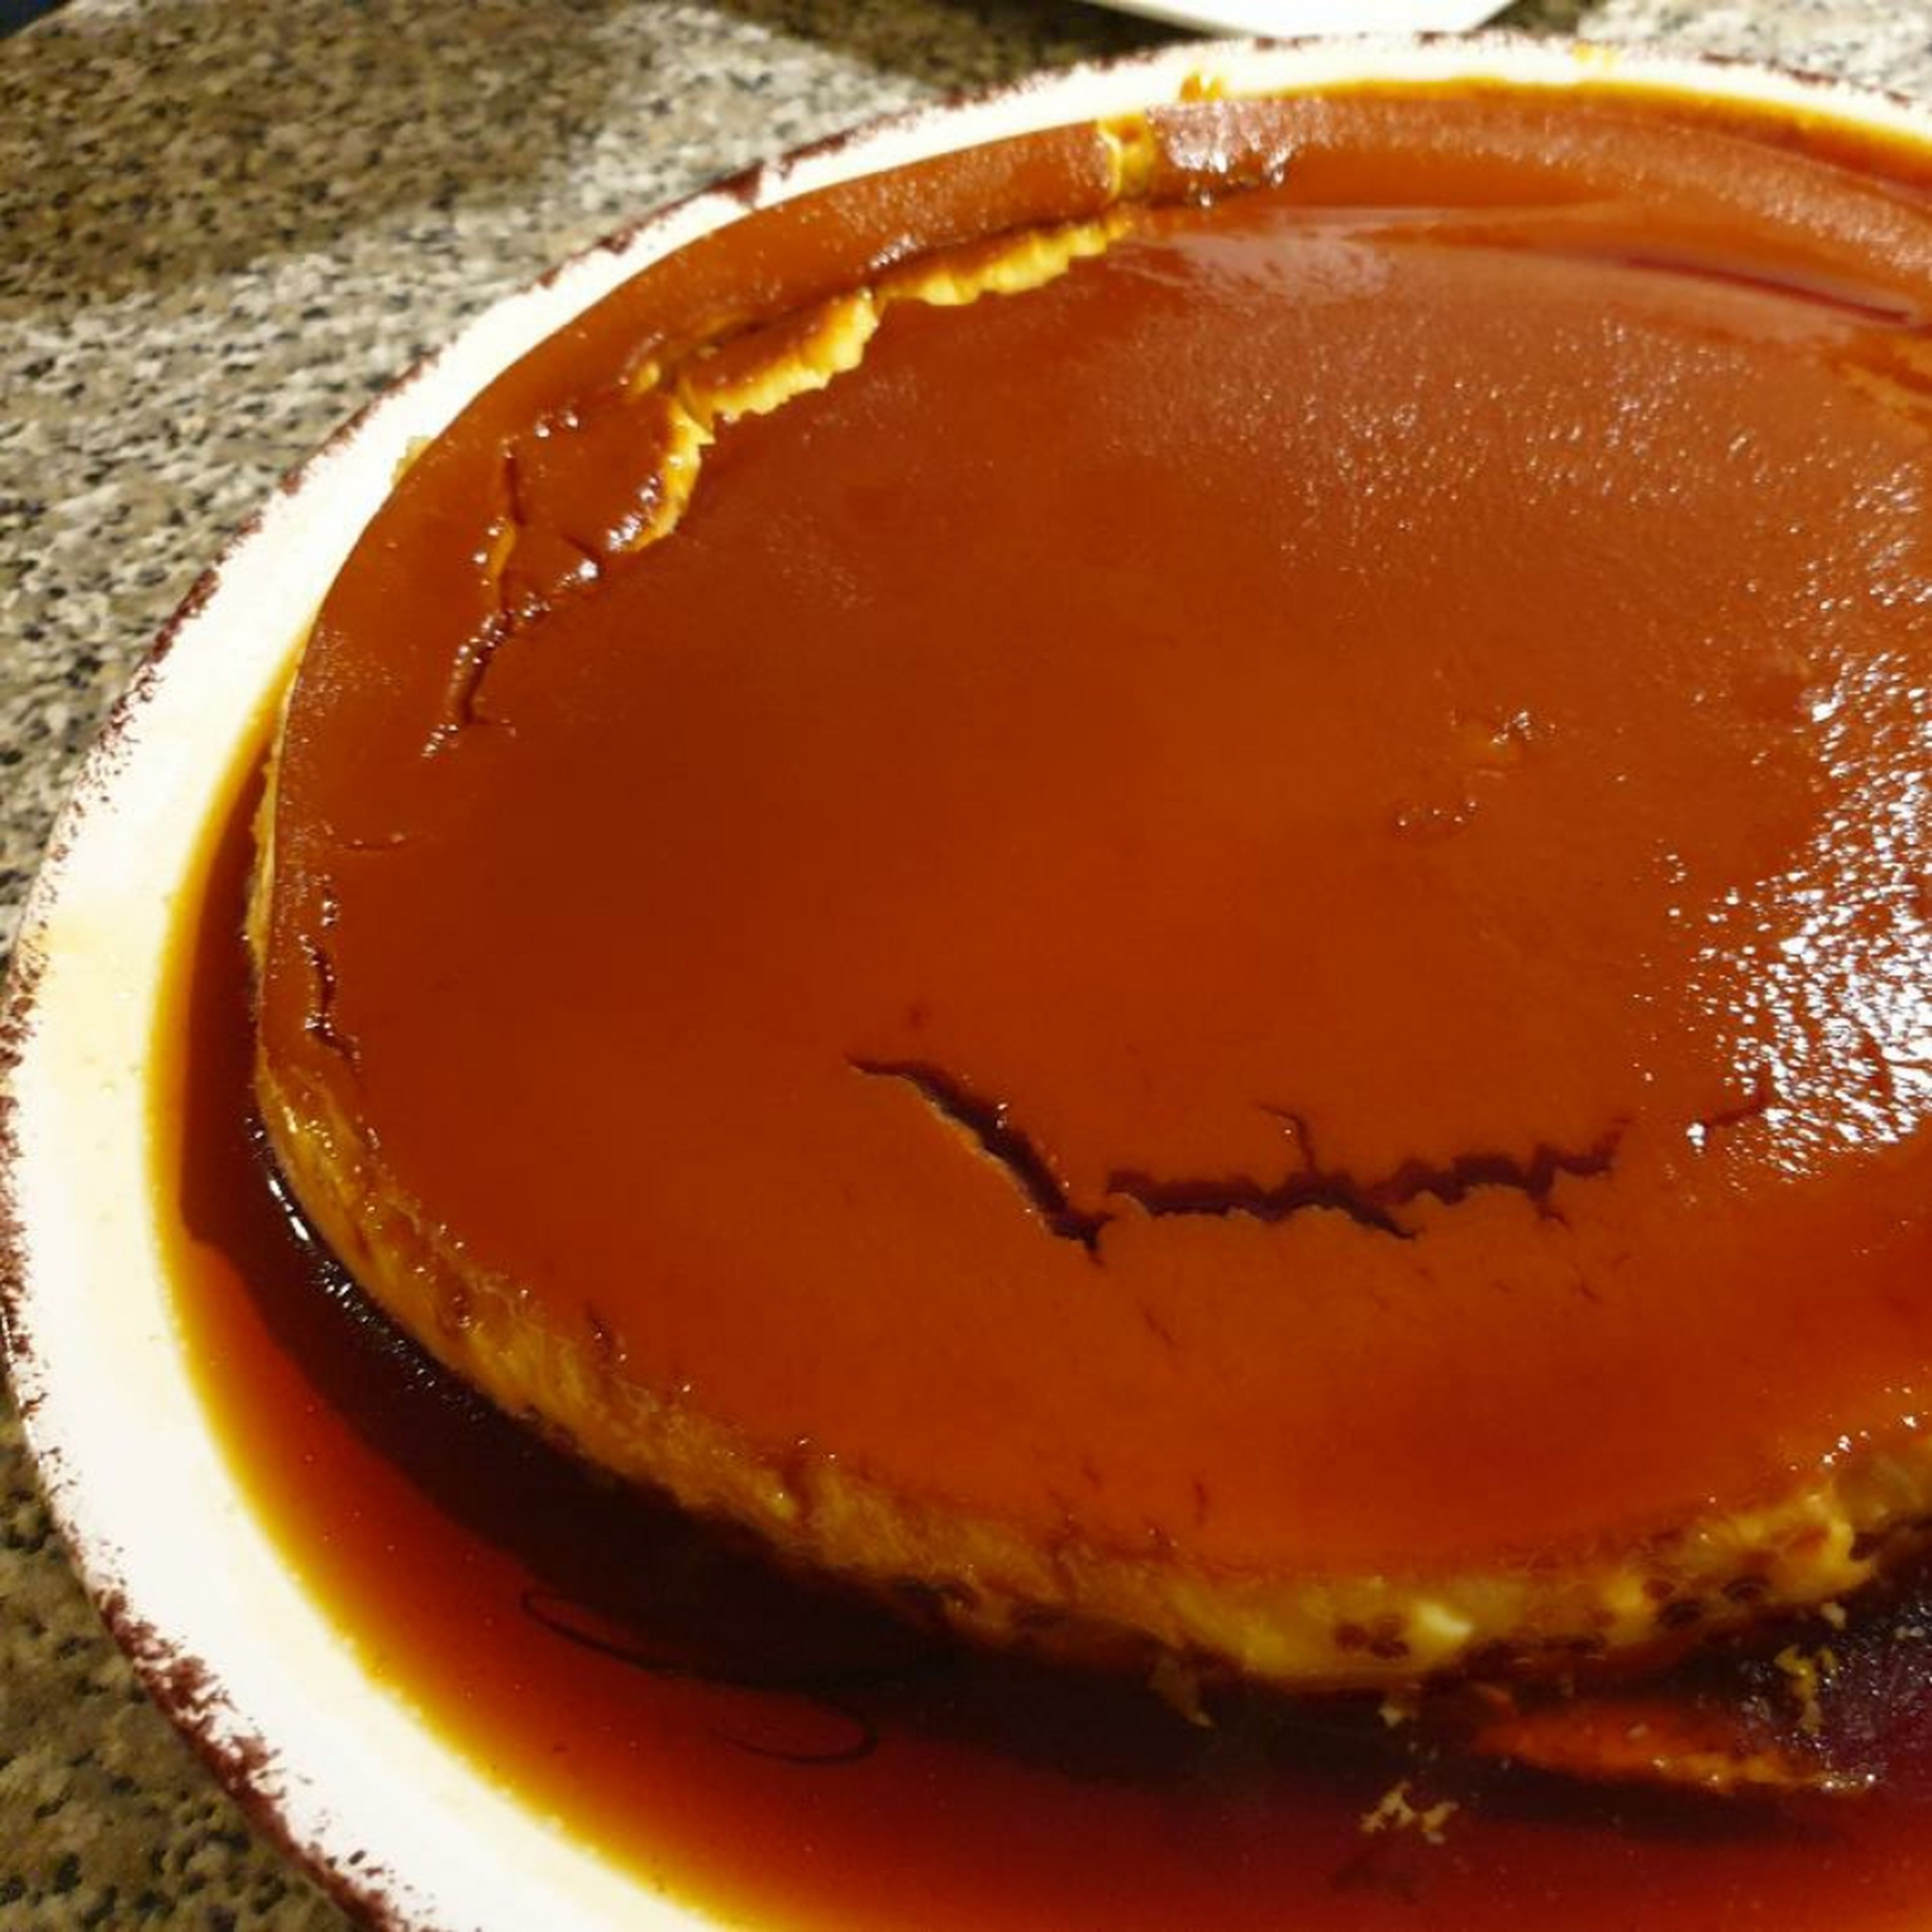 Using a large plate, place it on top of the round baking dish and turn it over, displaying the caramelised layer on the top.